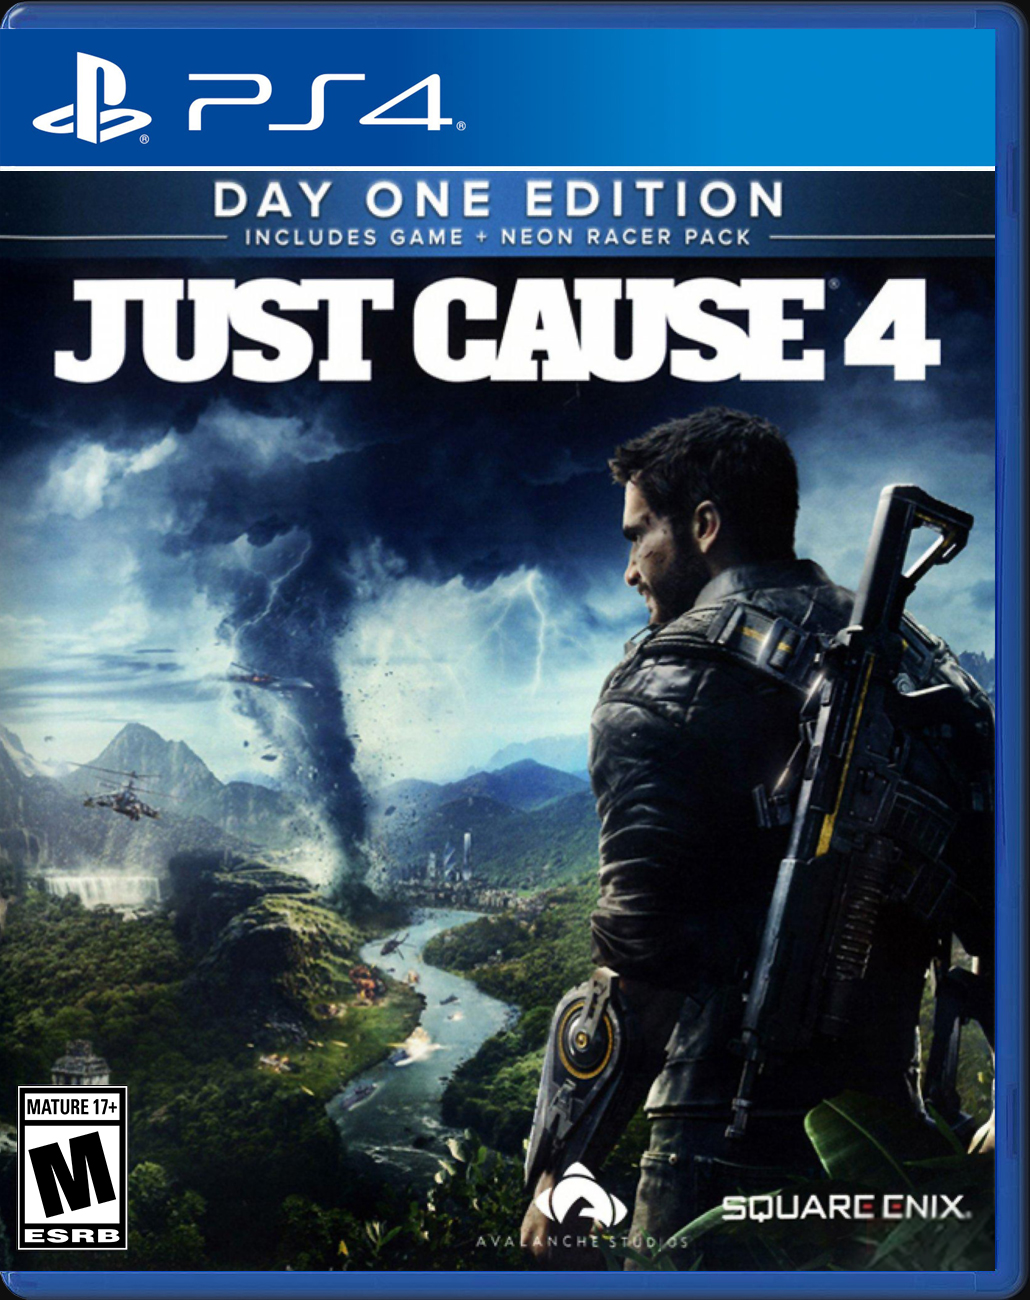 

Just Cause 4 PS4 Case

